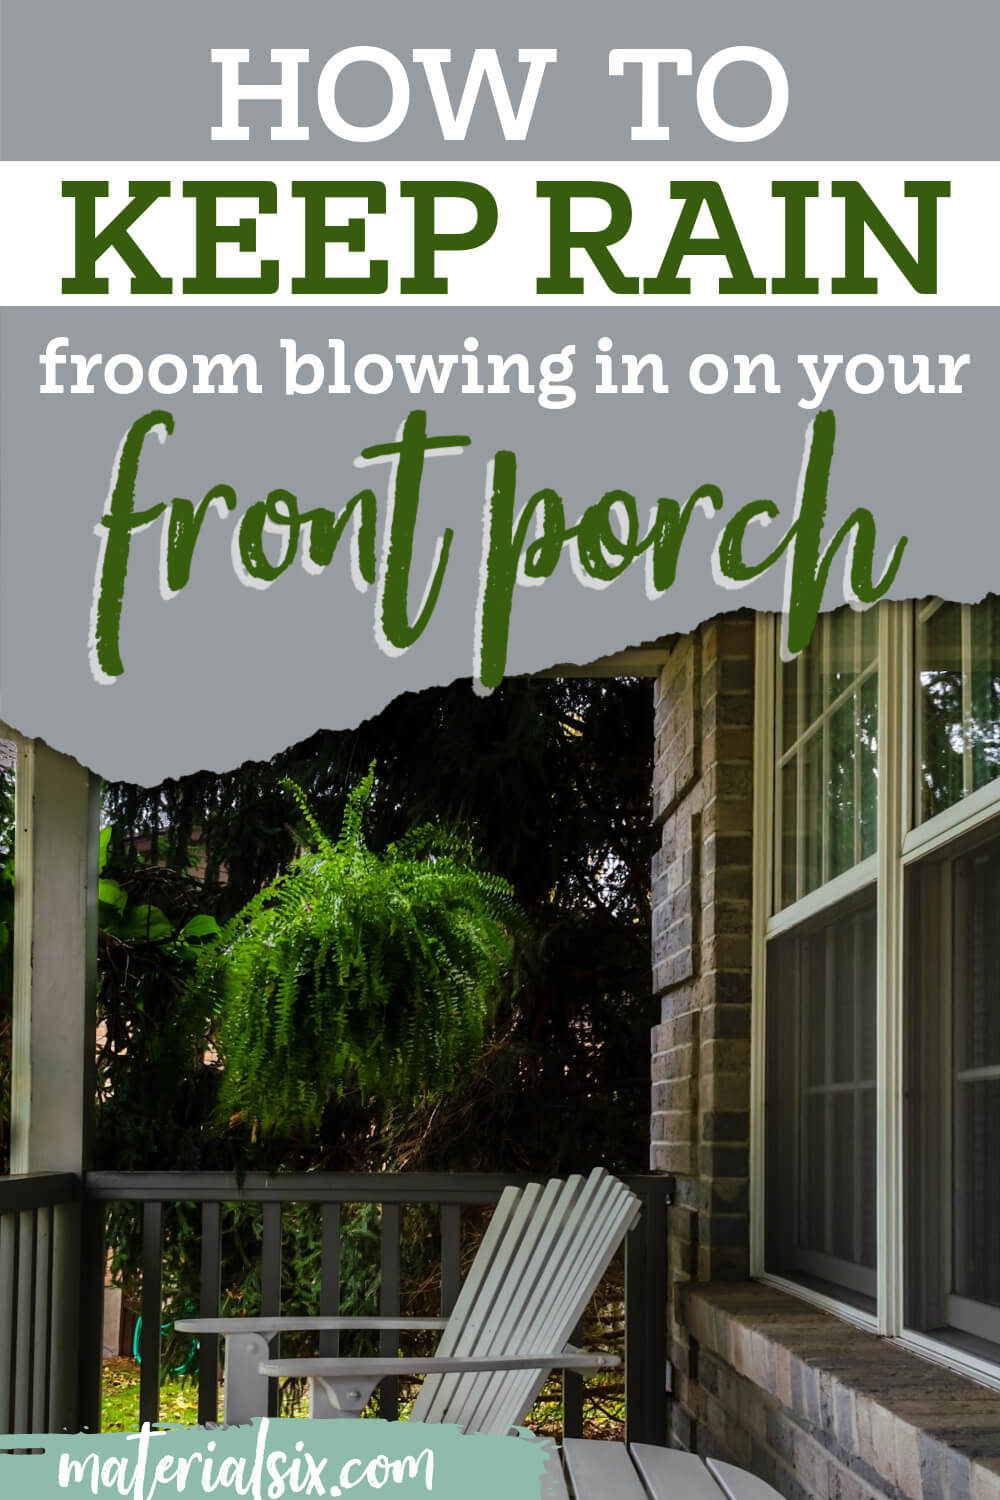 How to Keep Rain From Blowing in on Your Porch (9 Best Solutions)-1